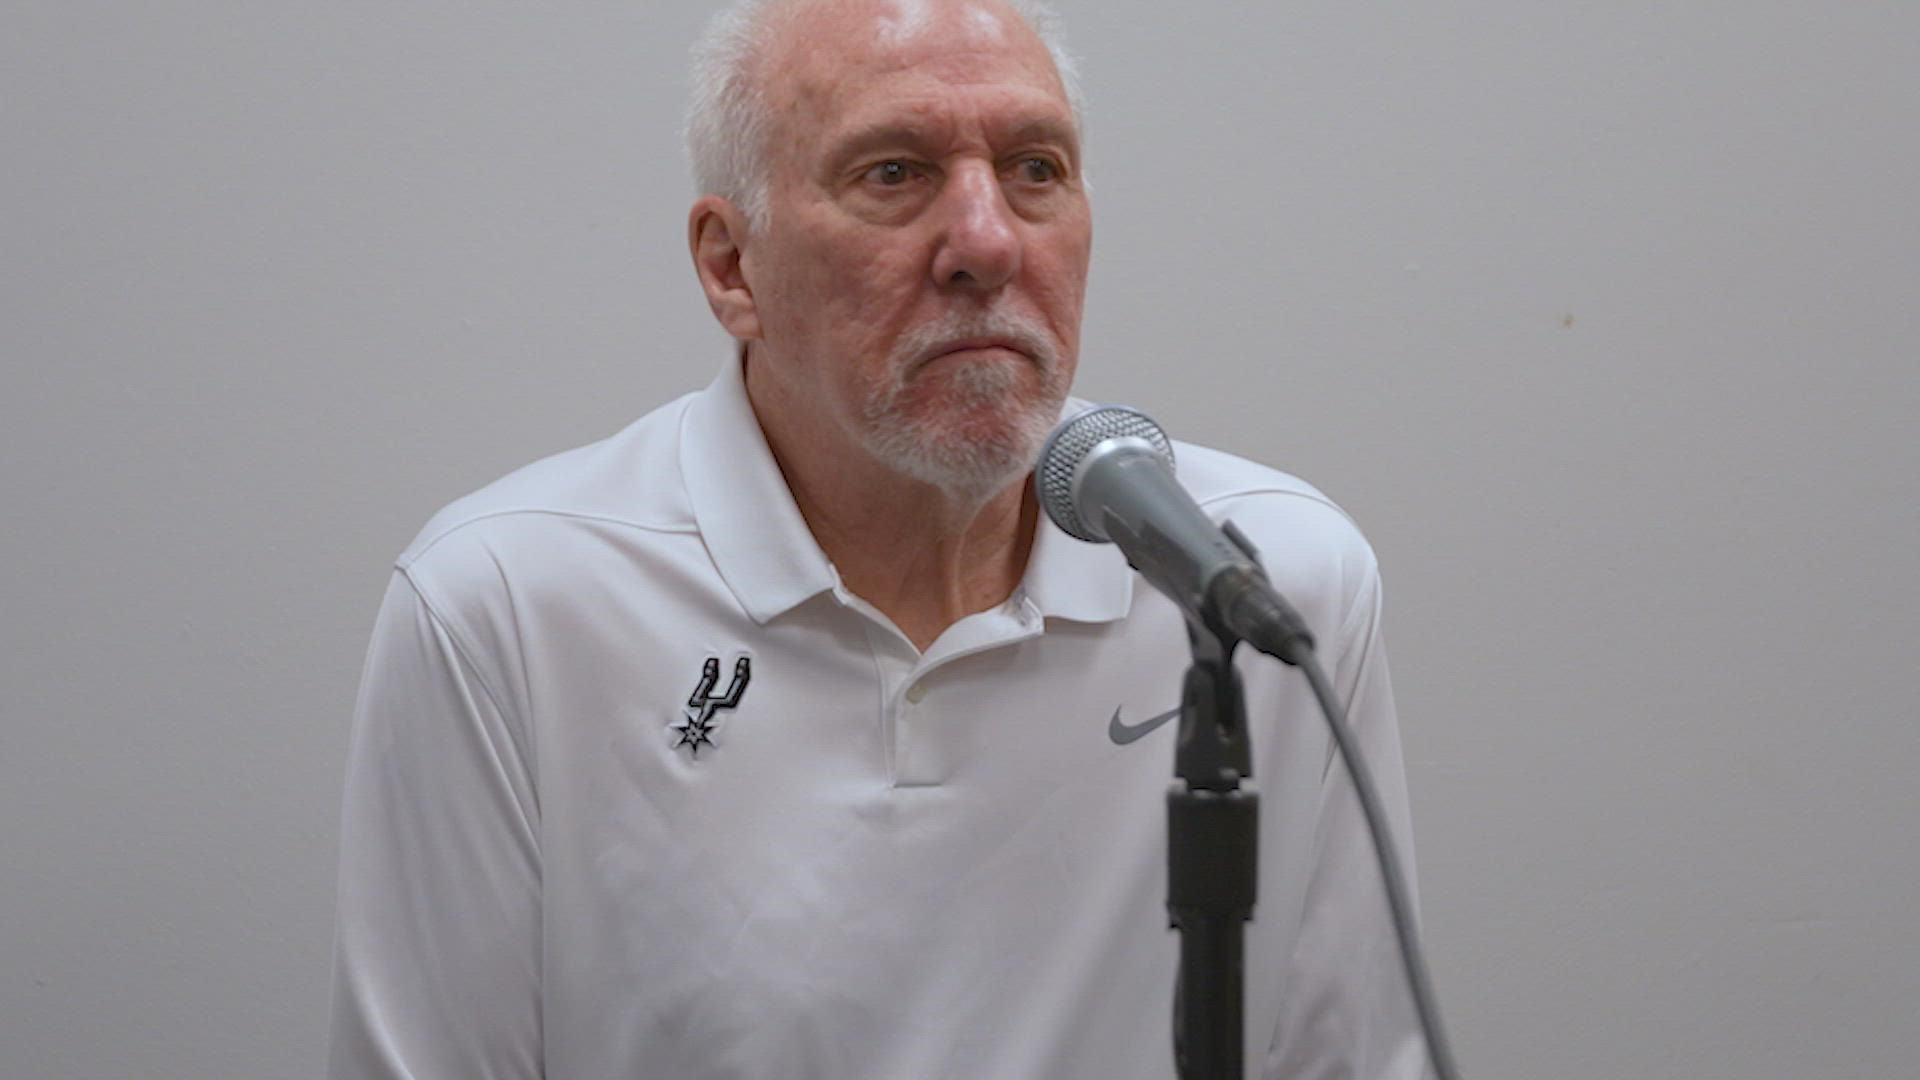 "It's just not who we are, it's not who I am, I can't operate like that," Pop said. "It's the right thing to do, to continue to compete."